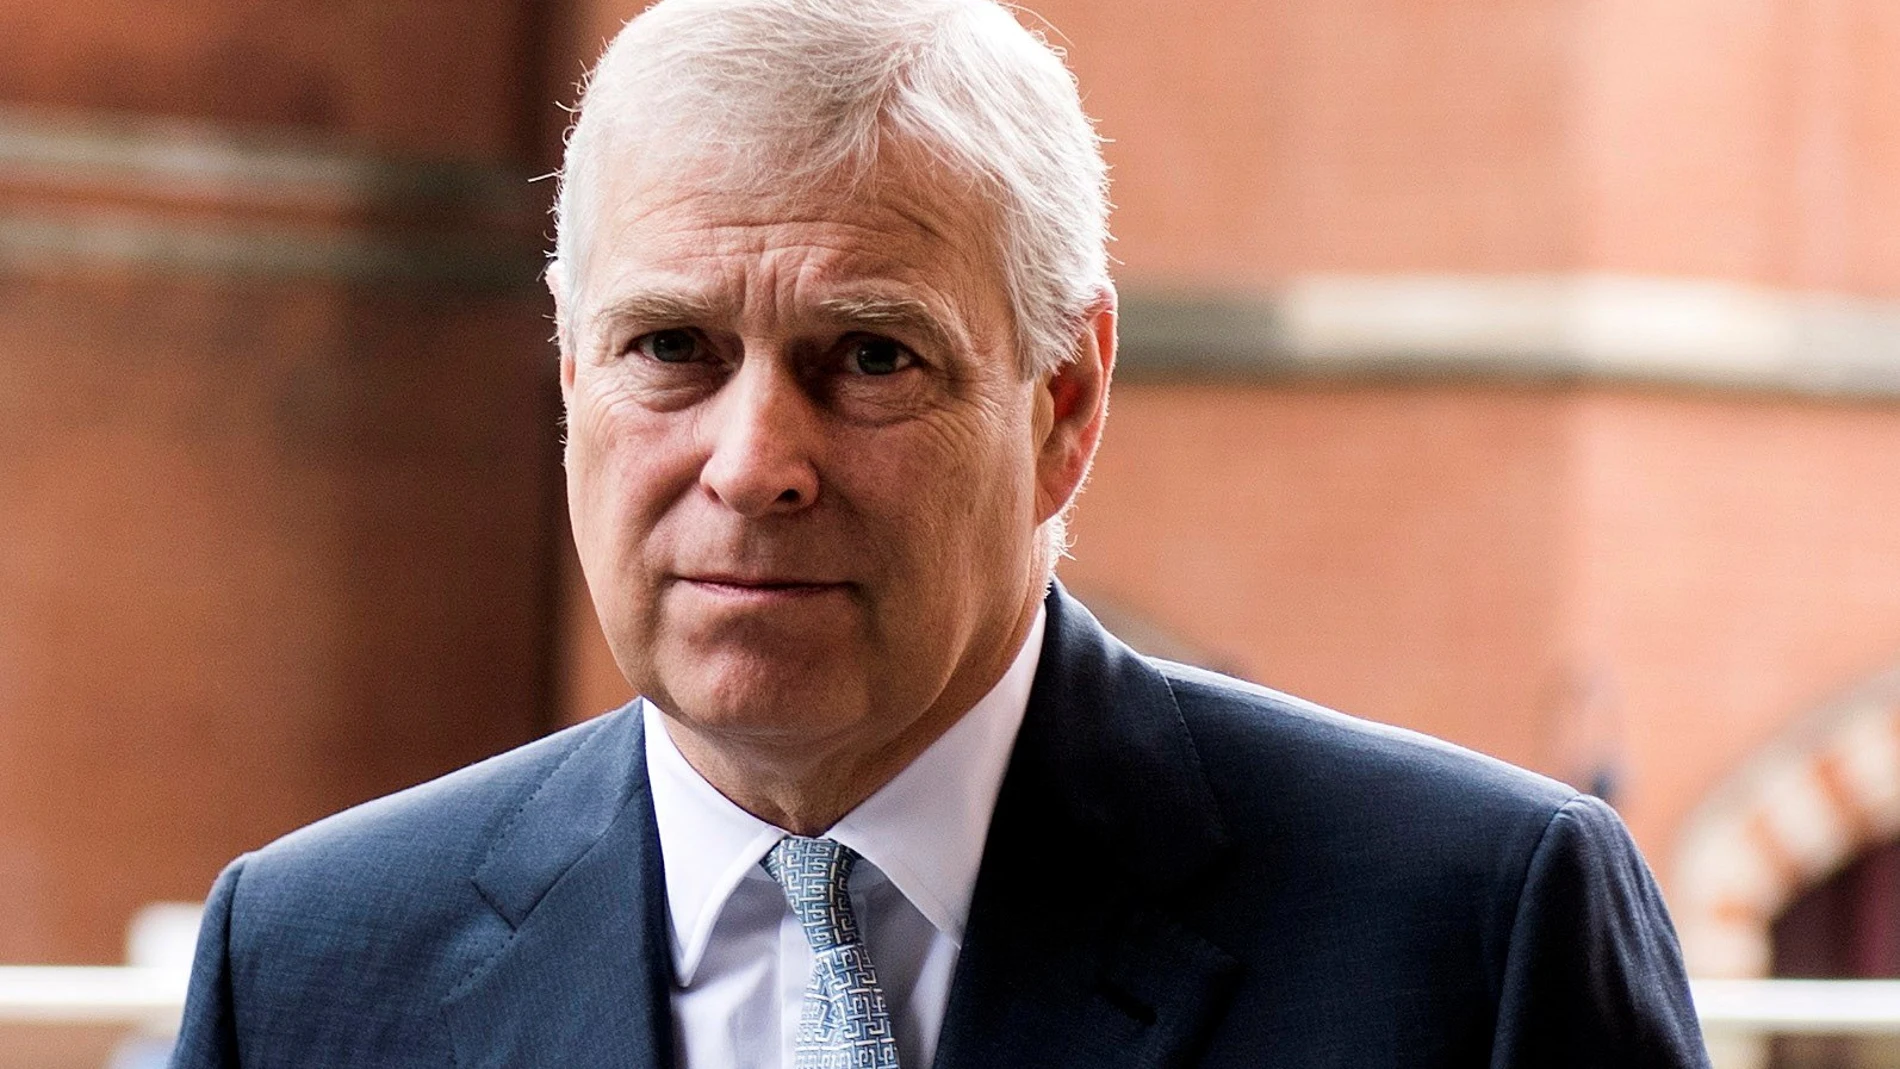 Prince Andrew 'stepping back' from royal duties